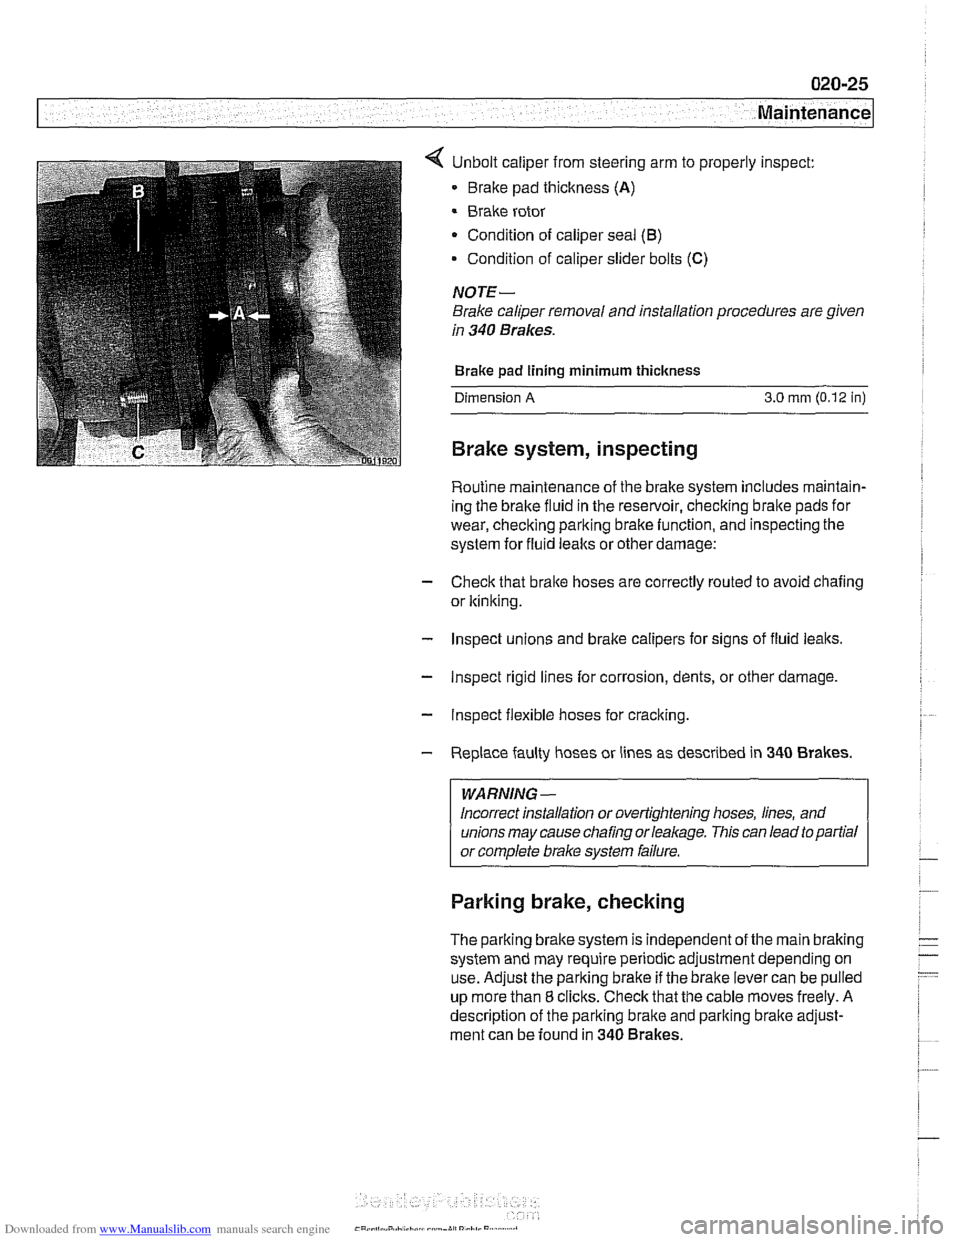 BMW 528i 1999 E39 Workshop Manual Downloaded from www.Manualslib.com manuals search engine 
7 Maintenance 
< Unbolt caliper from steering arm  to properly  inspect: 
Brake  pad thickness 
(A) 
Brake rotor 
Condition  of caliper seal 
